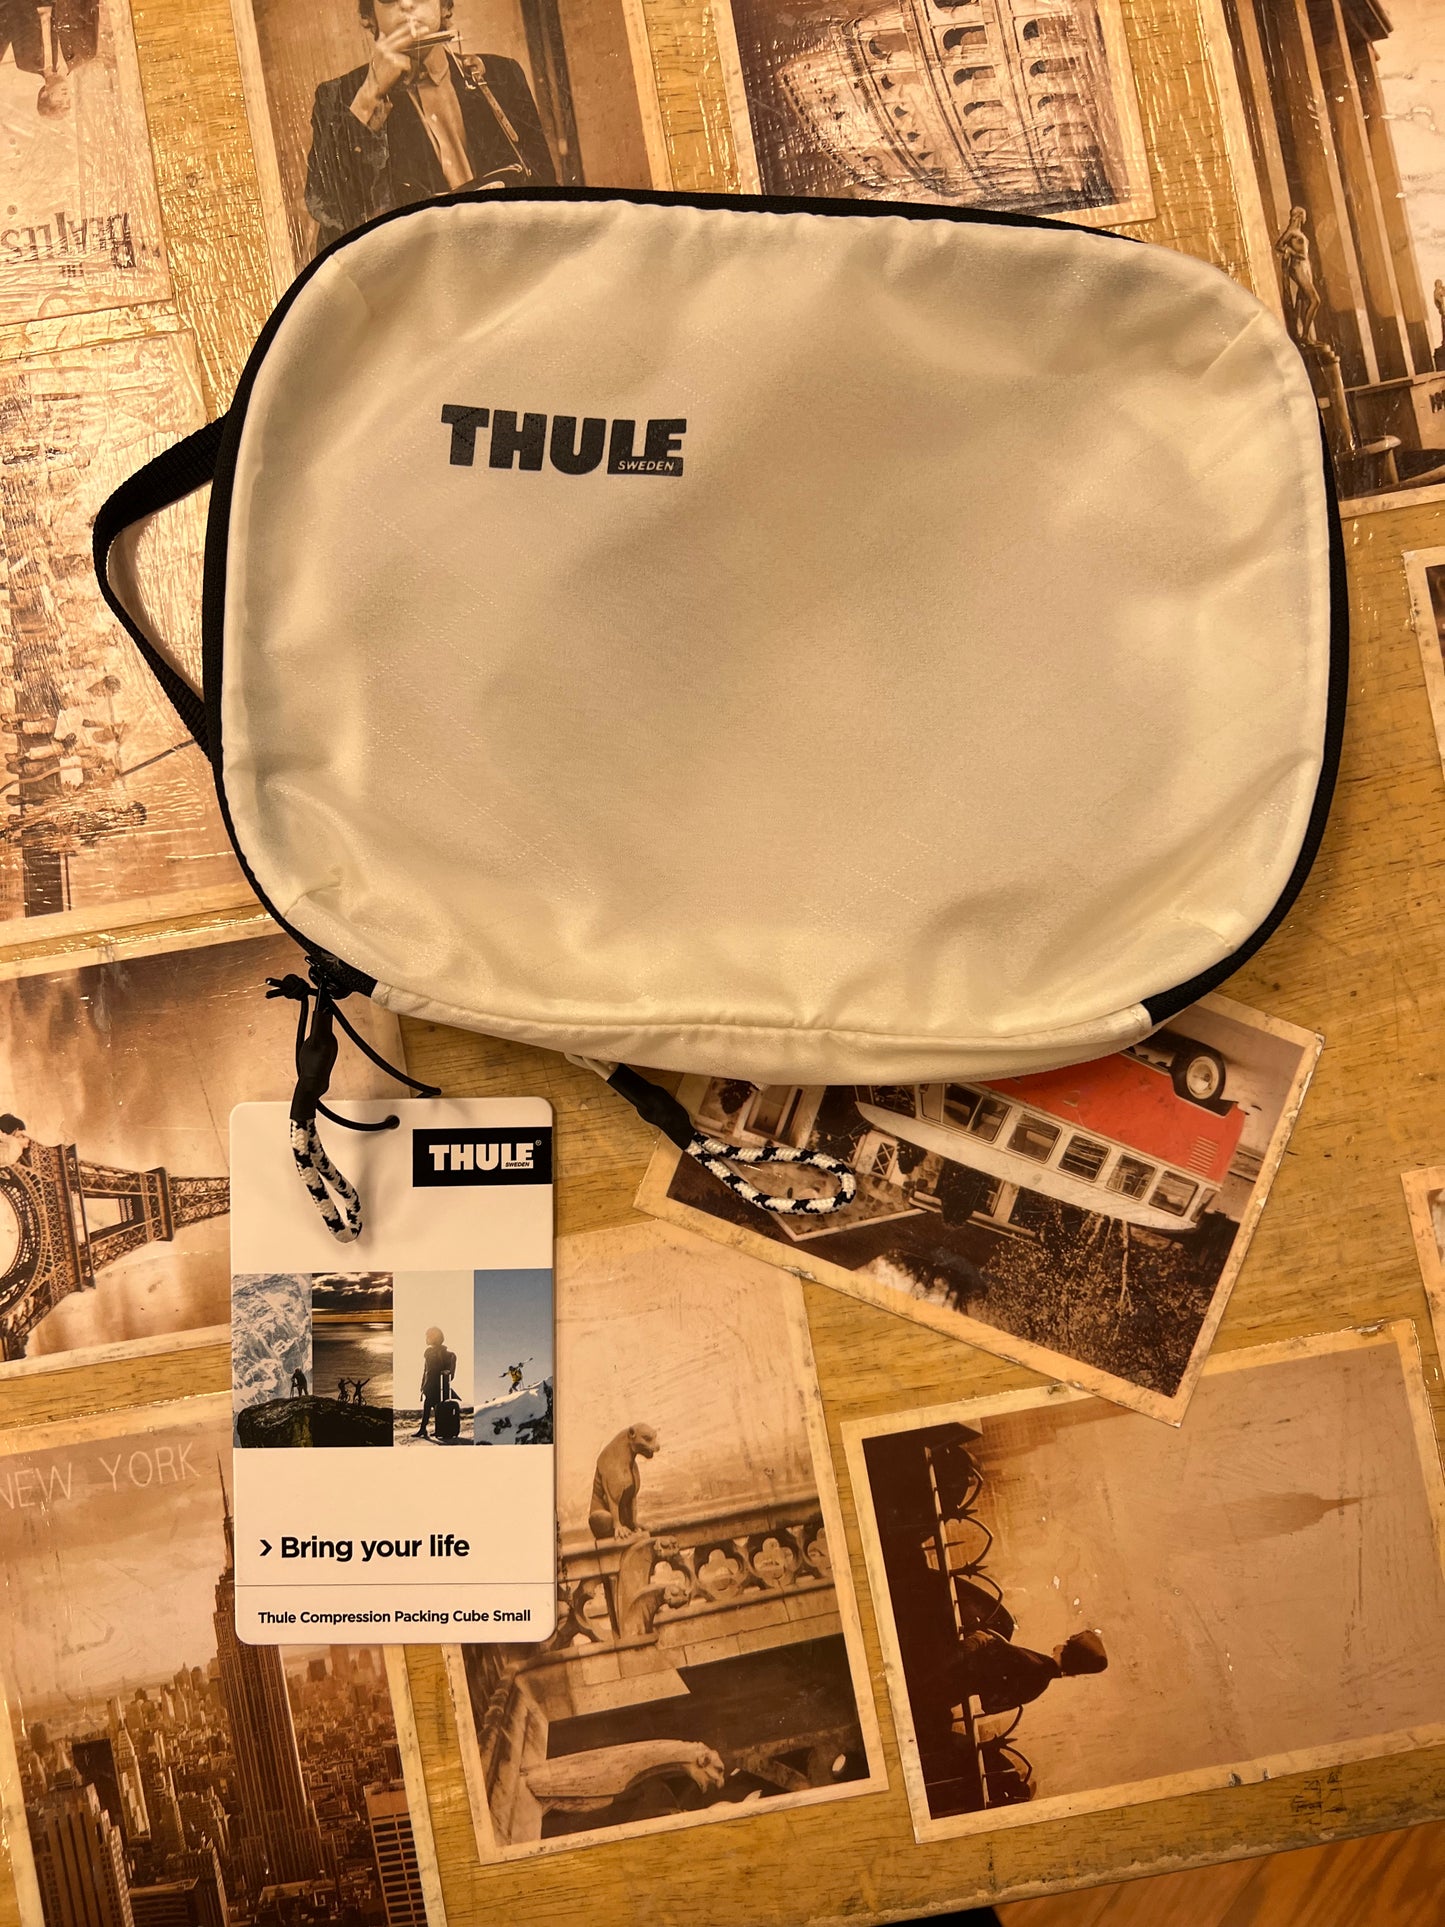 On Sale - Thule Spira Small Compression Packing Cube